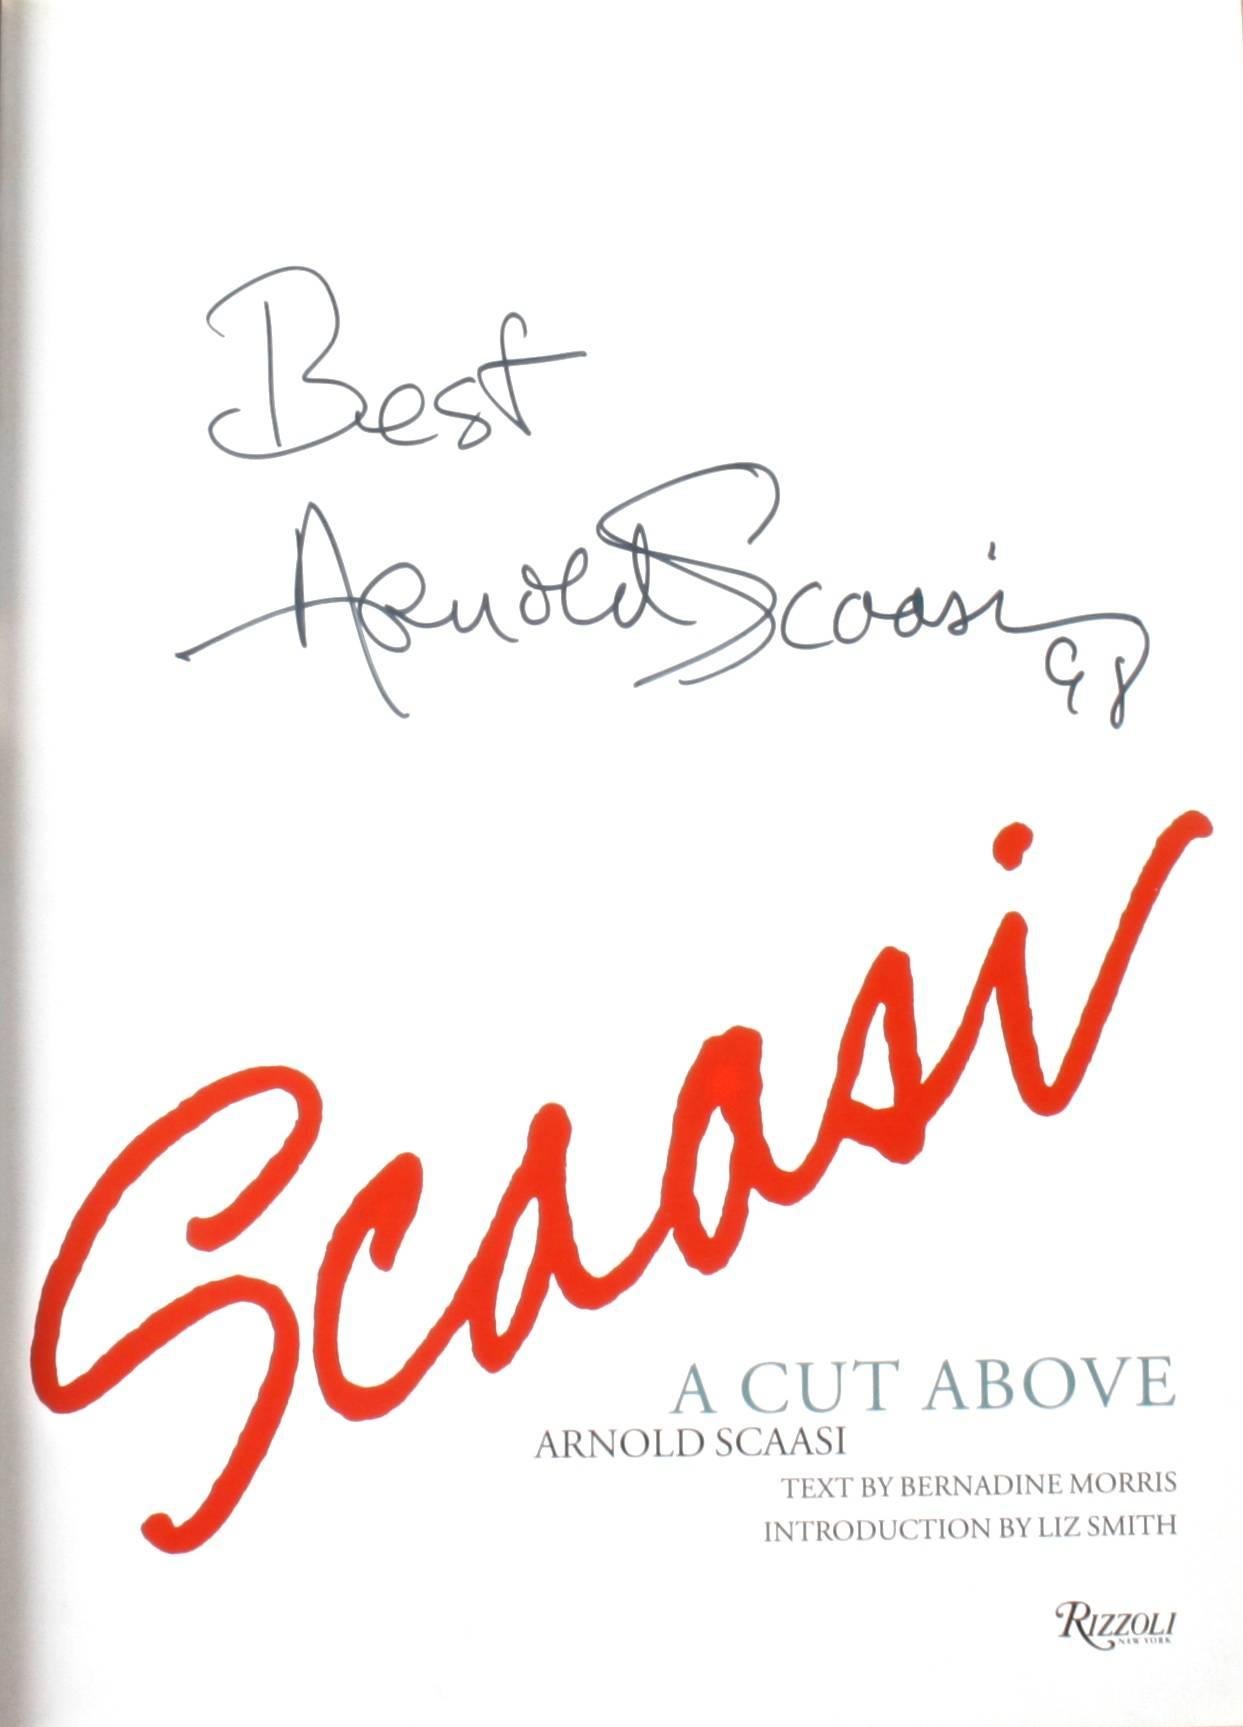 Scaasi, A CUT ABOVE, Arnold Scaasi, New York: Rizzoli, 1996. Signed first edition hardcover with dust jacket. 190 pp. A beautiful fashion retrospective of the highly successful career of designer Arnold Scaasi with a look at the private, social and